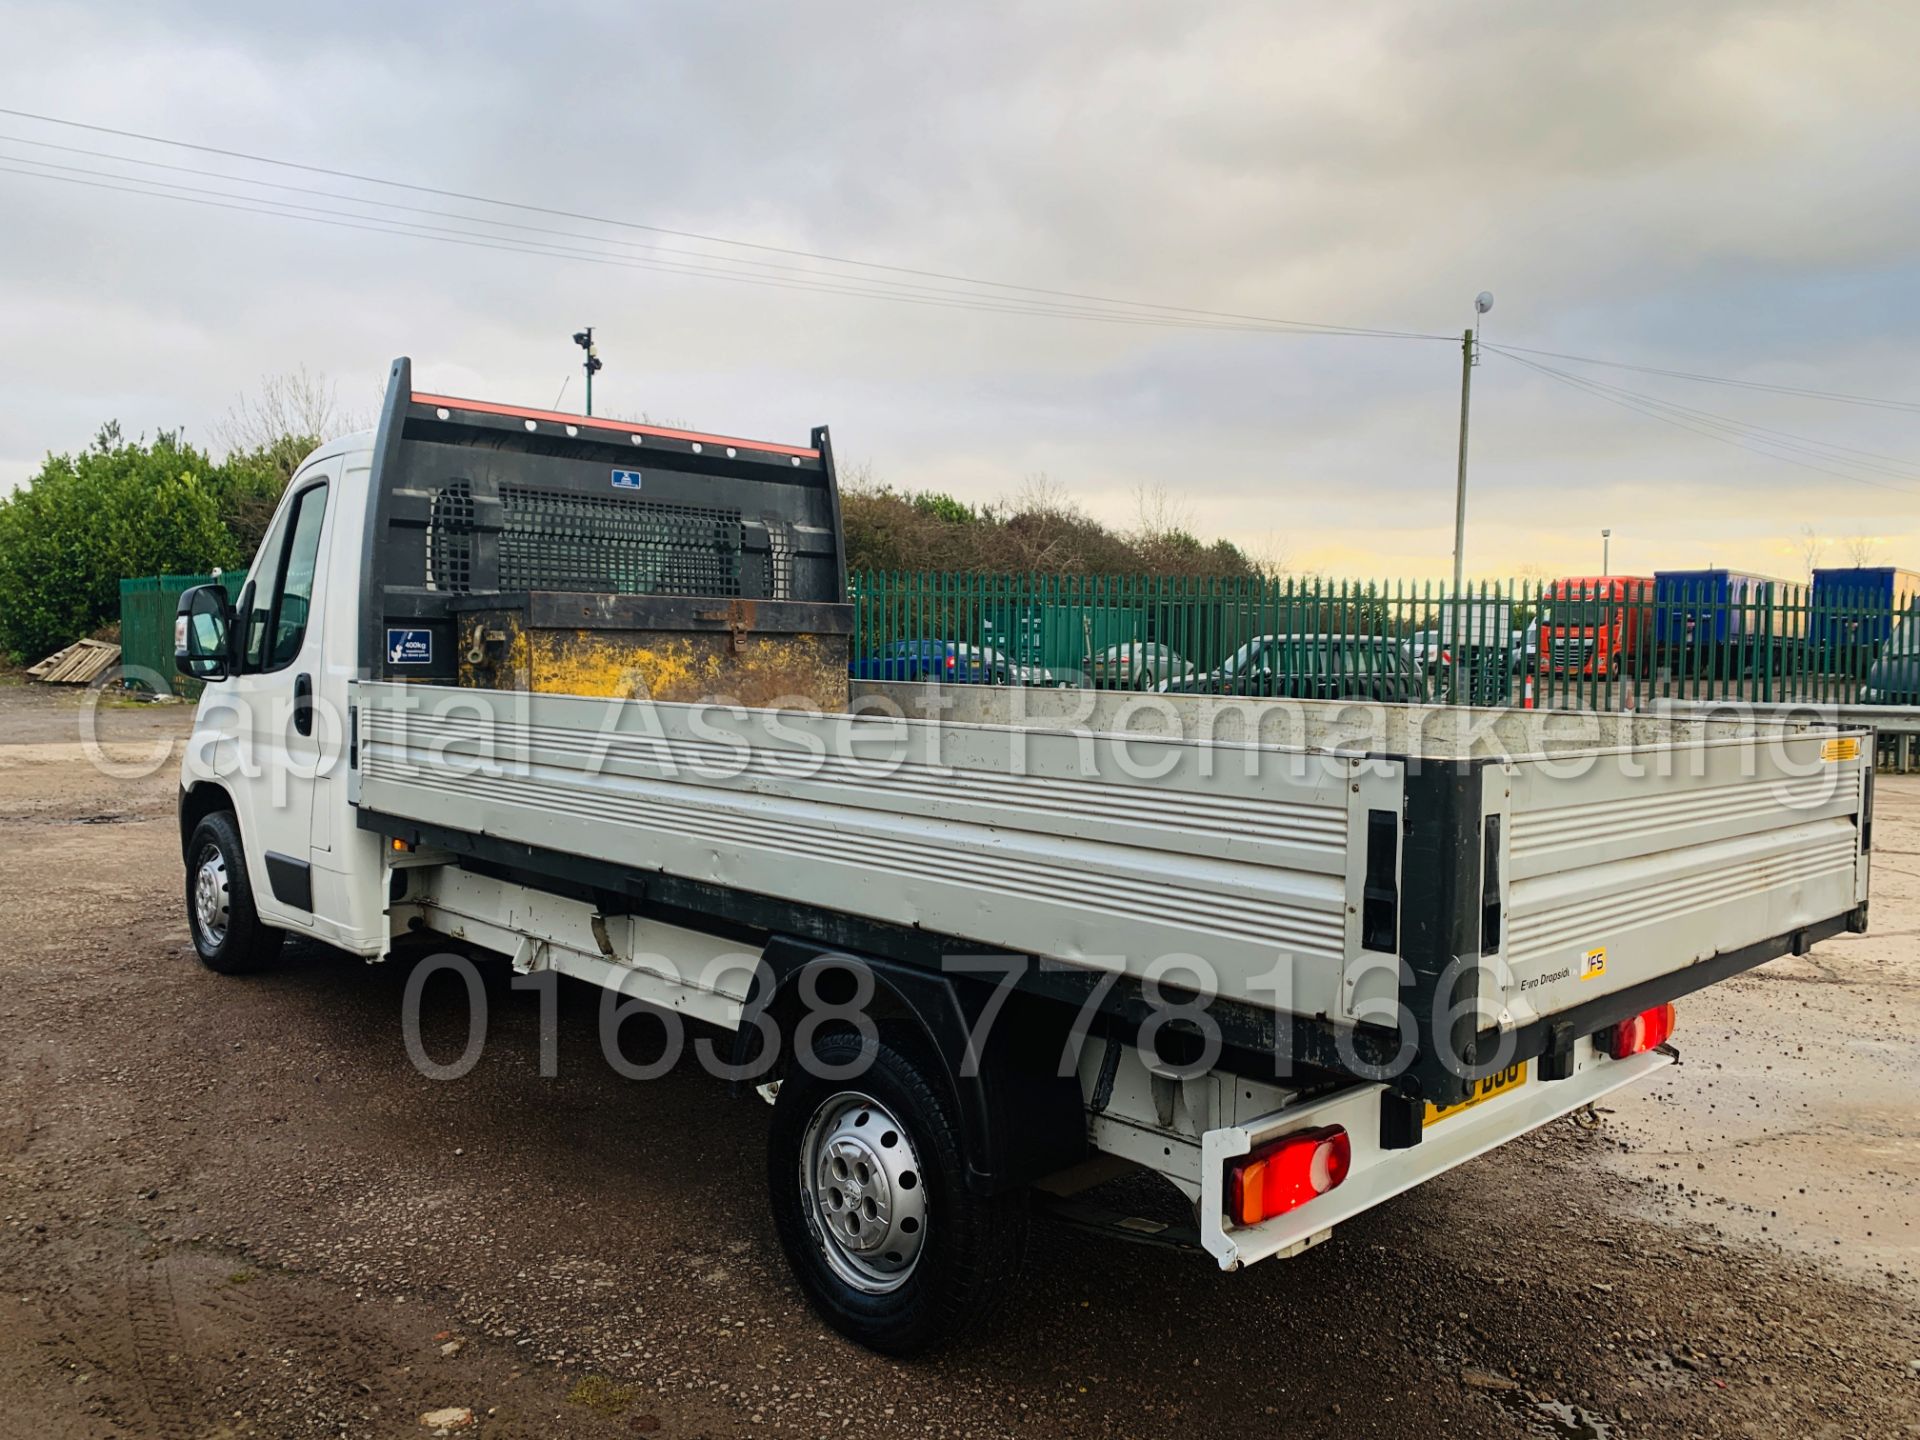 PEUGEOT BOXER *LWB - DROPSIDE TRUCK* (2017 - EURO 6 MODEL) '2.0 HDI - 6 SPEED' *ONLY 45,000 MILES* - Image 9 of 35